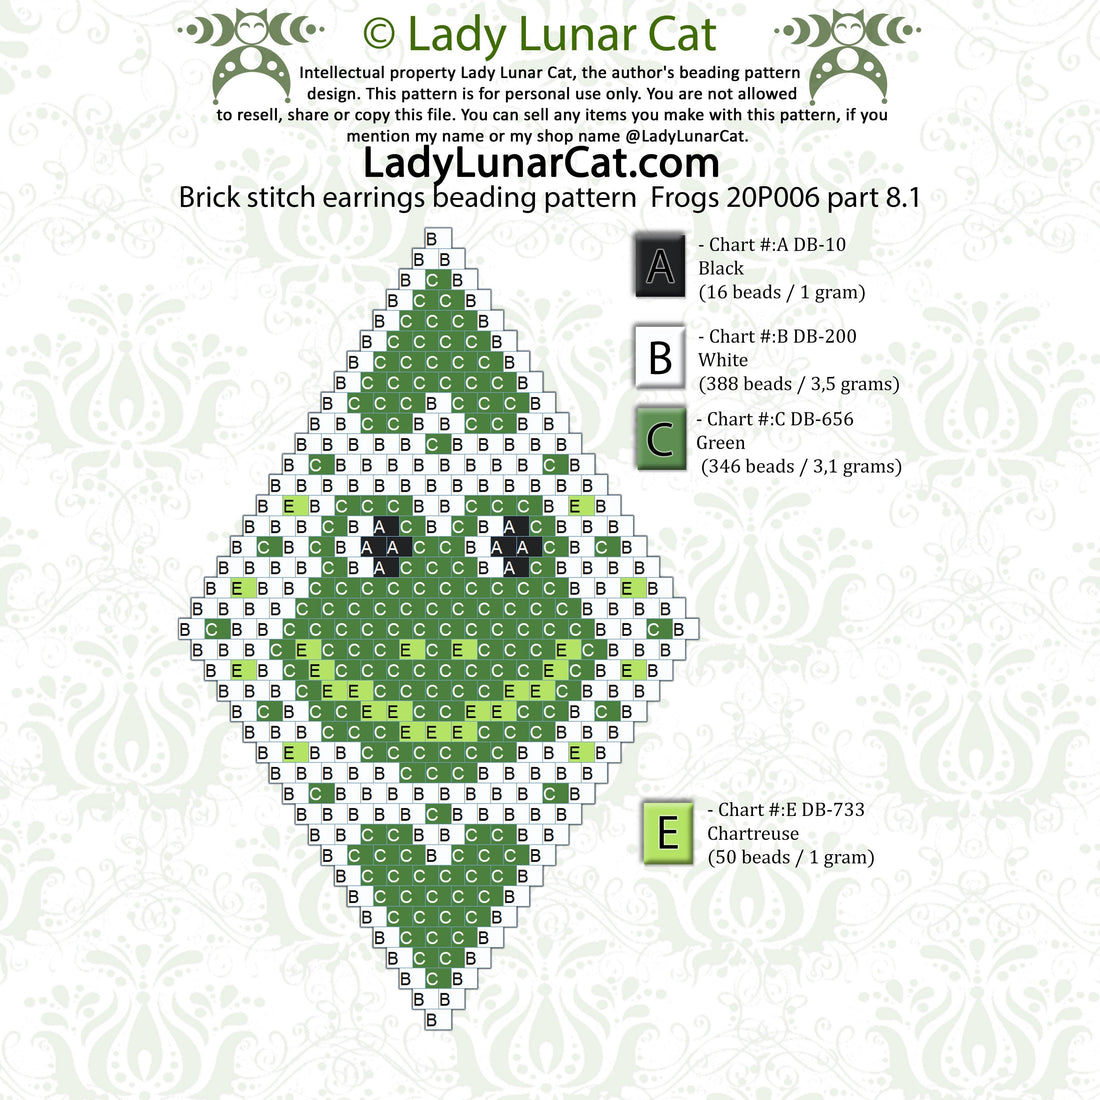 A free example of a frog earring from my paid toad earring set LadyLunarCat